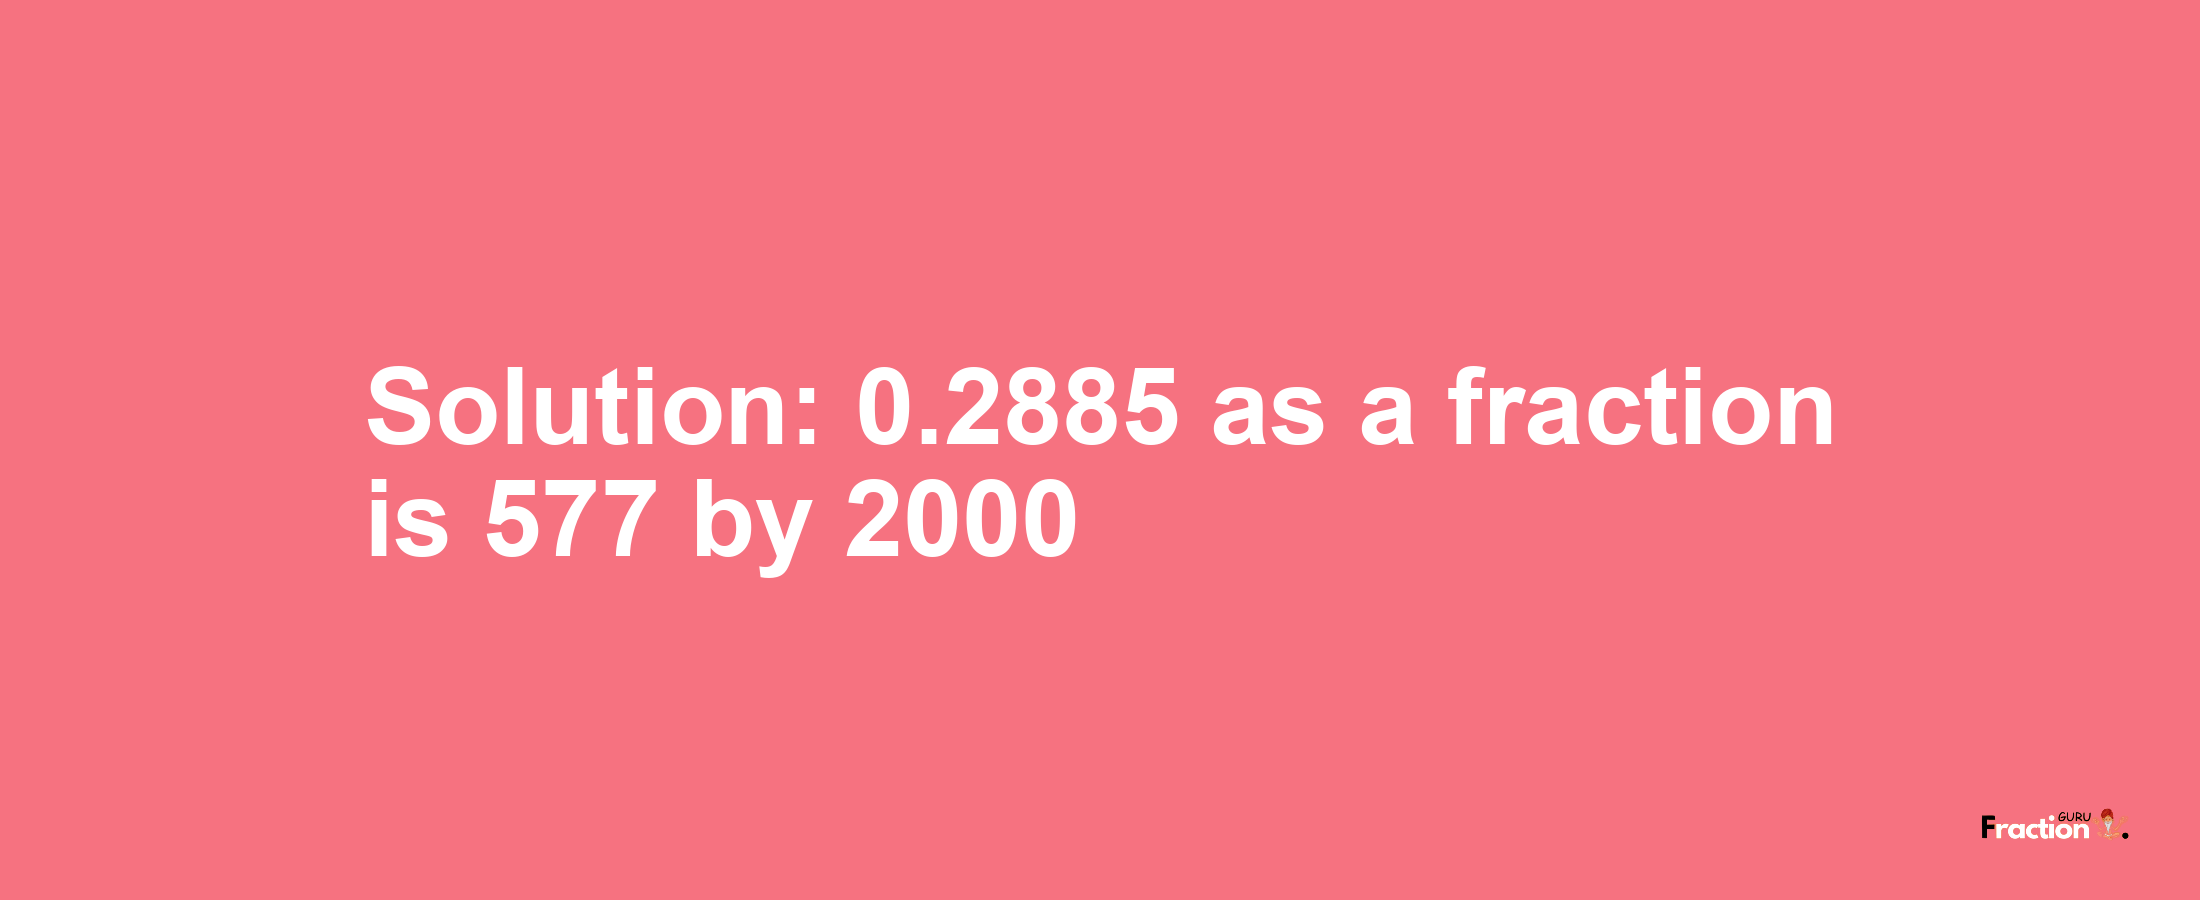 Solution:0.2885 as a fraction is 577/2000